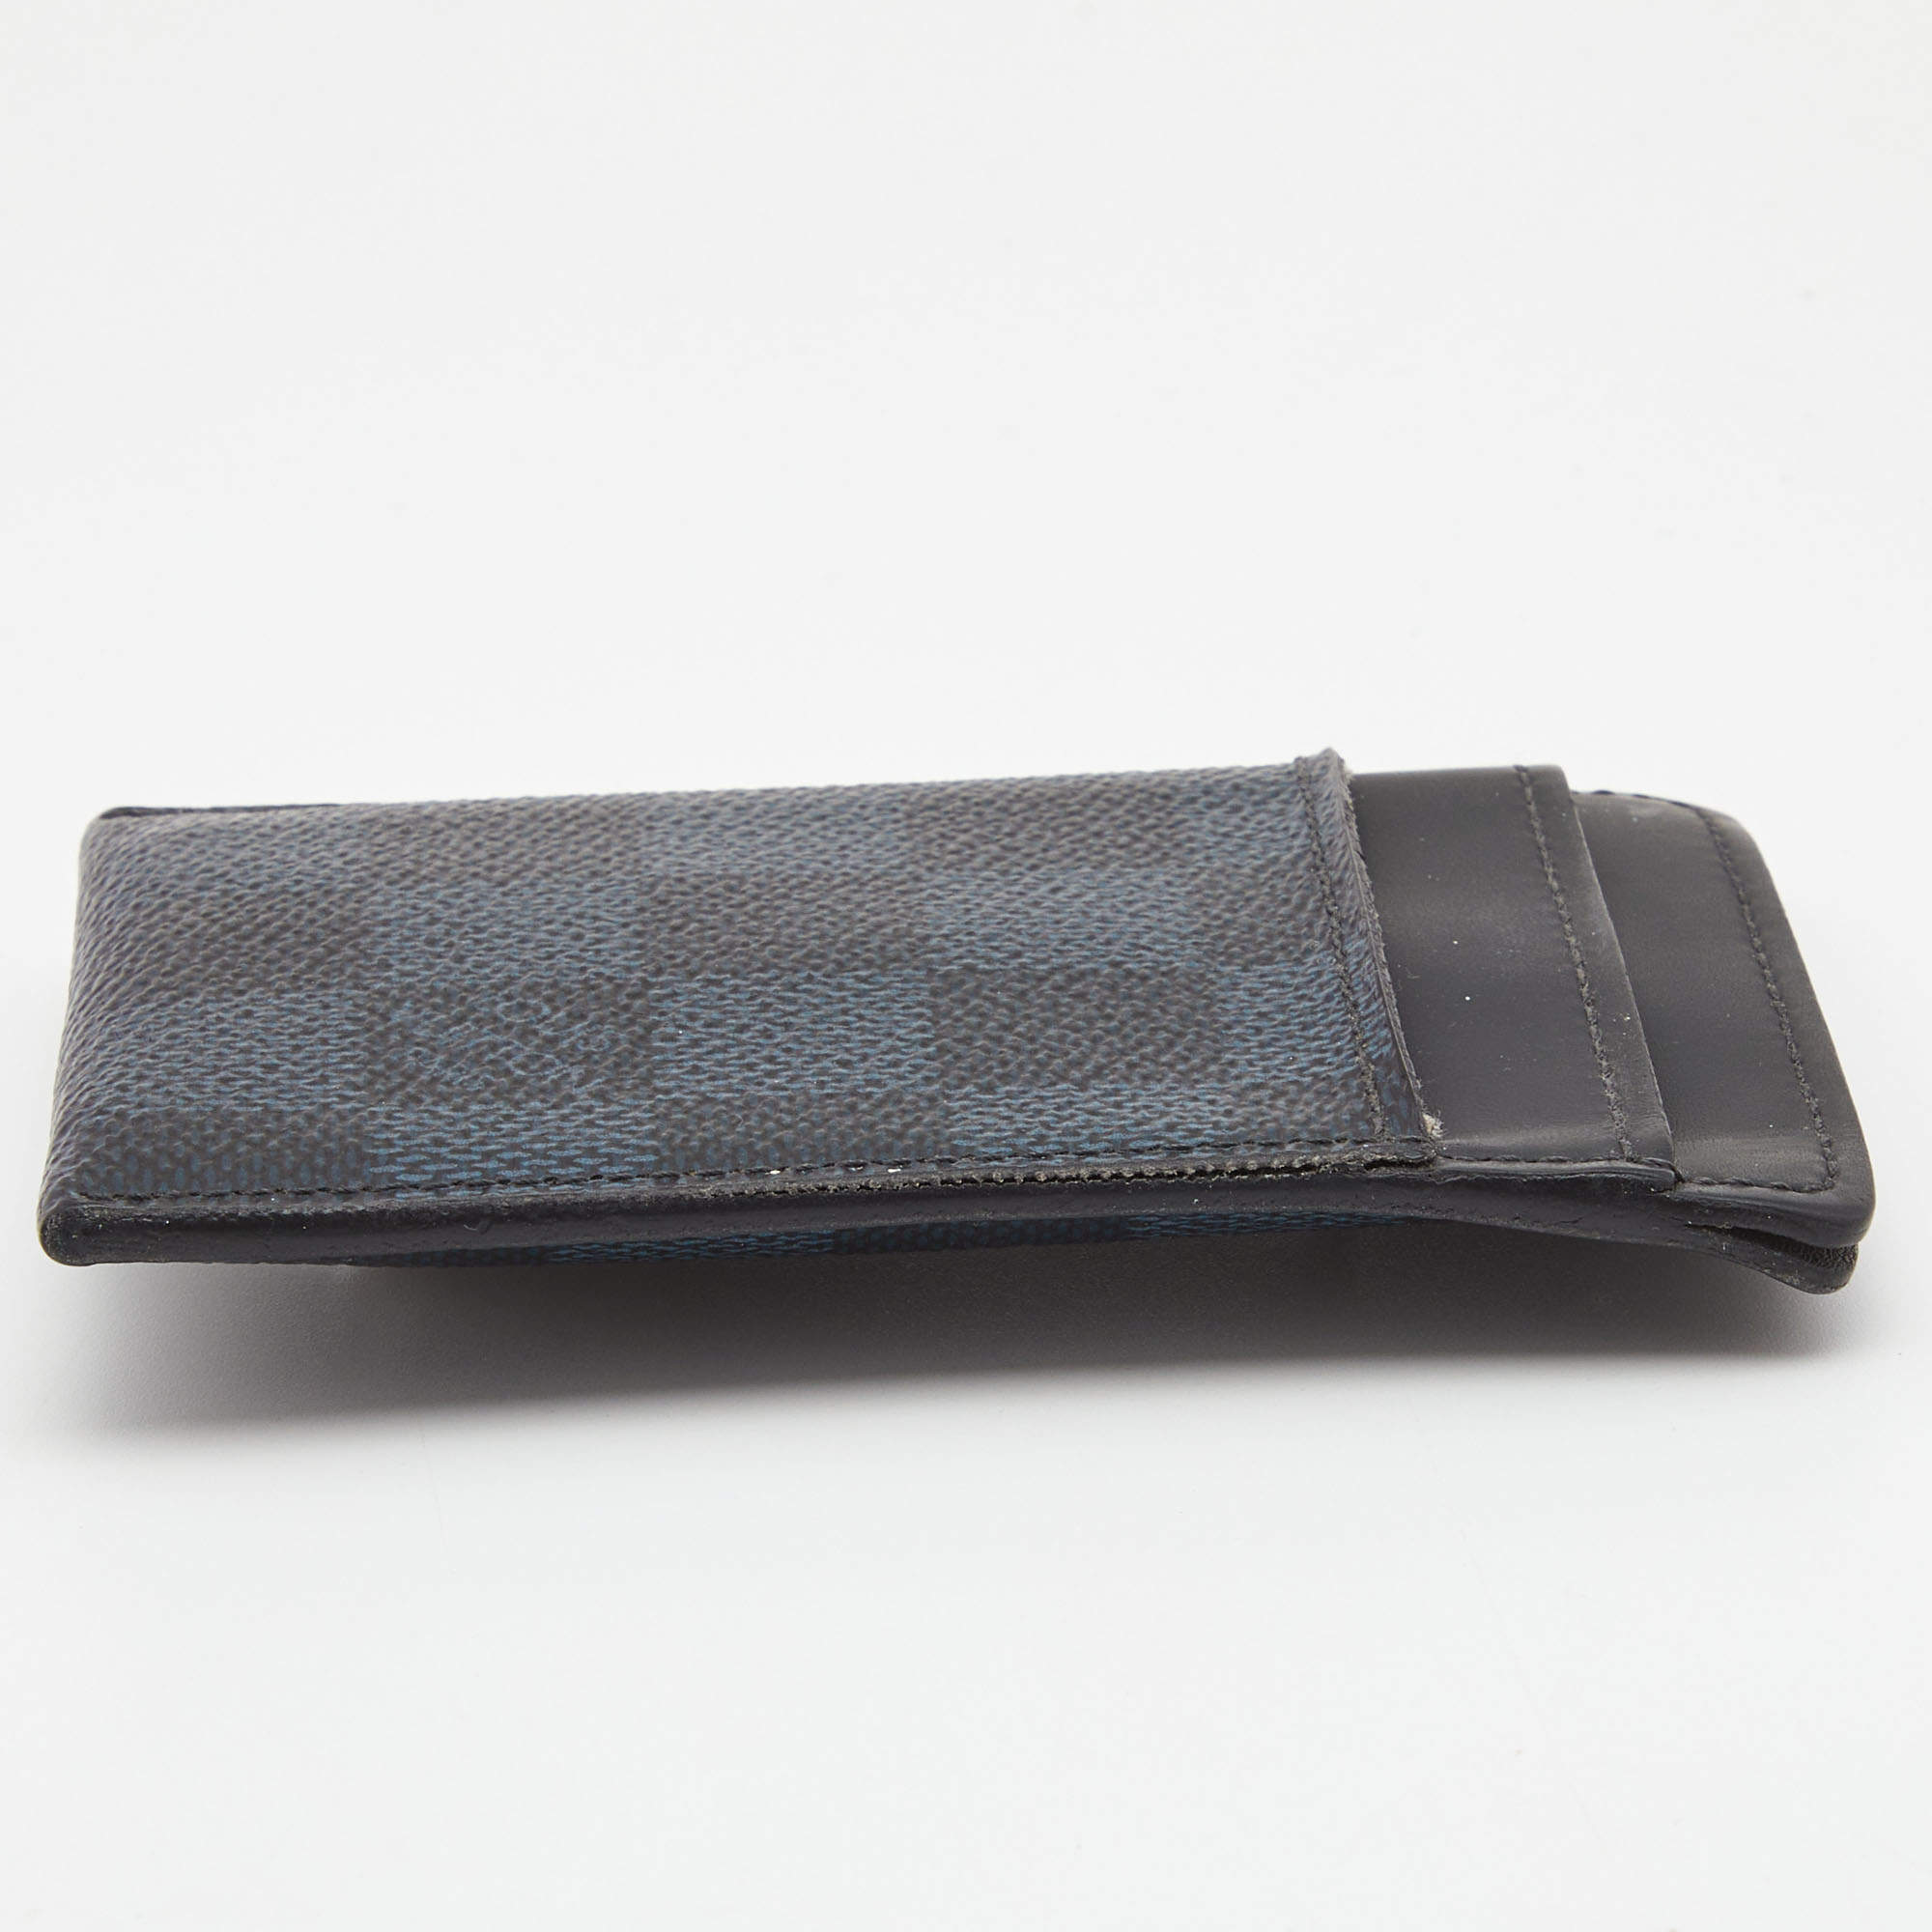 Card Holder Pince Damier Graphite Canvas - Wallets and Small